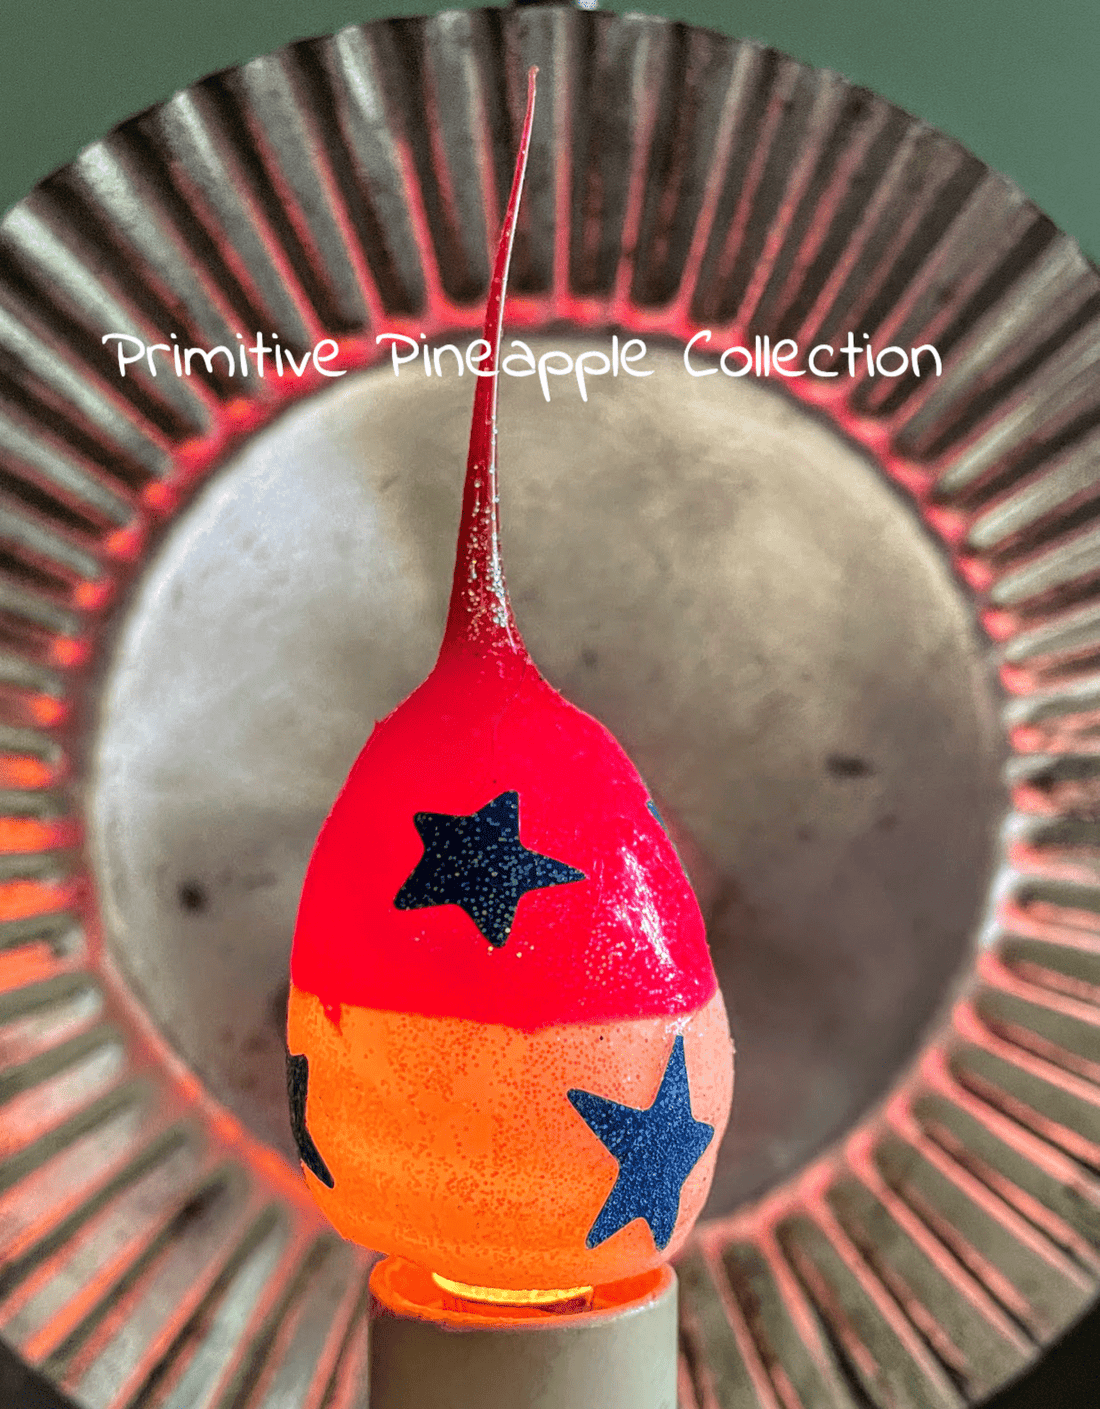 Primitive Patriotic Americana Hand-dipped Blue Stars Silicone Bulb Reusable - The Primitive Pineapple Collection